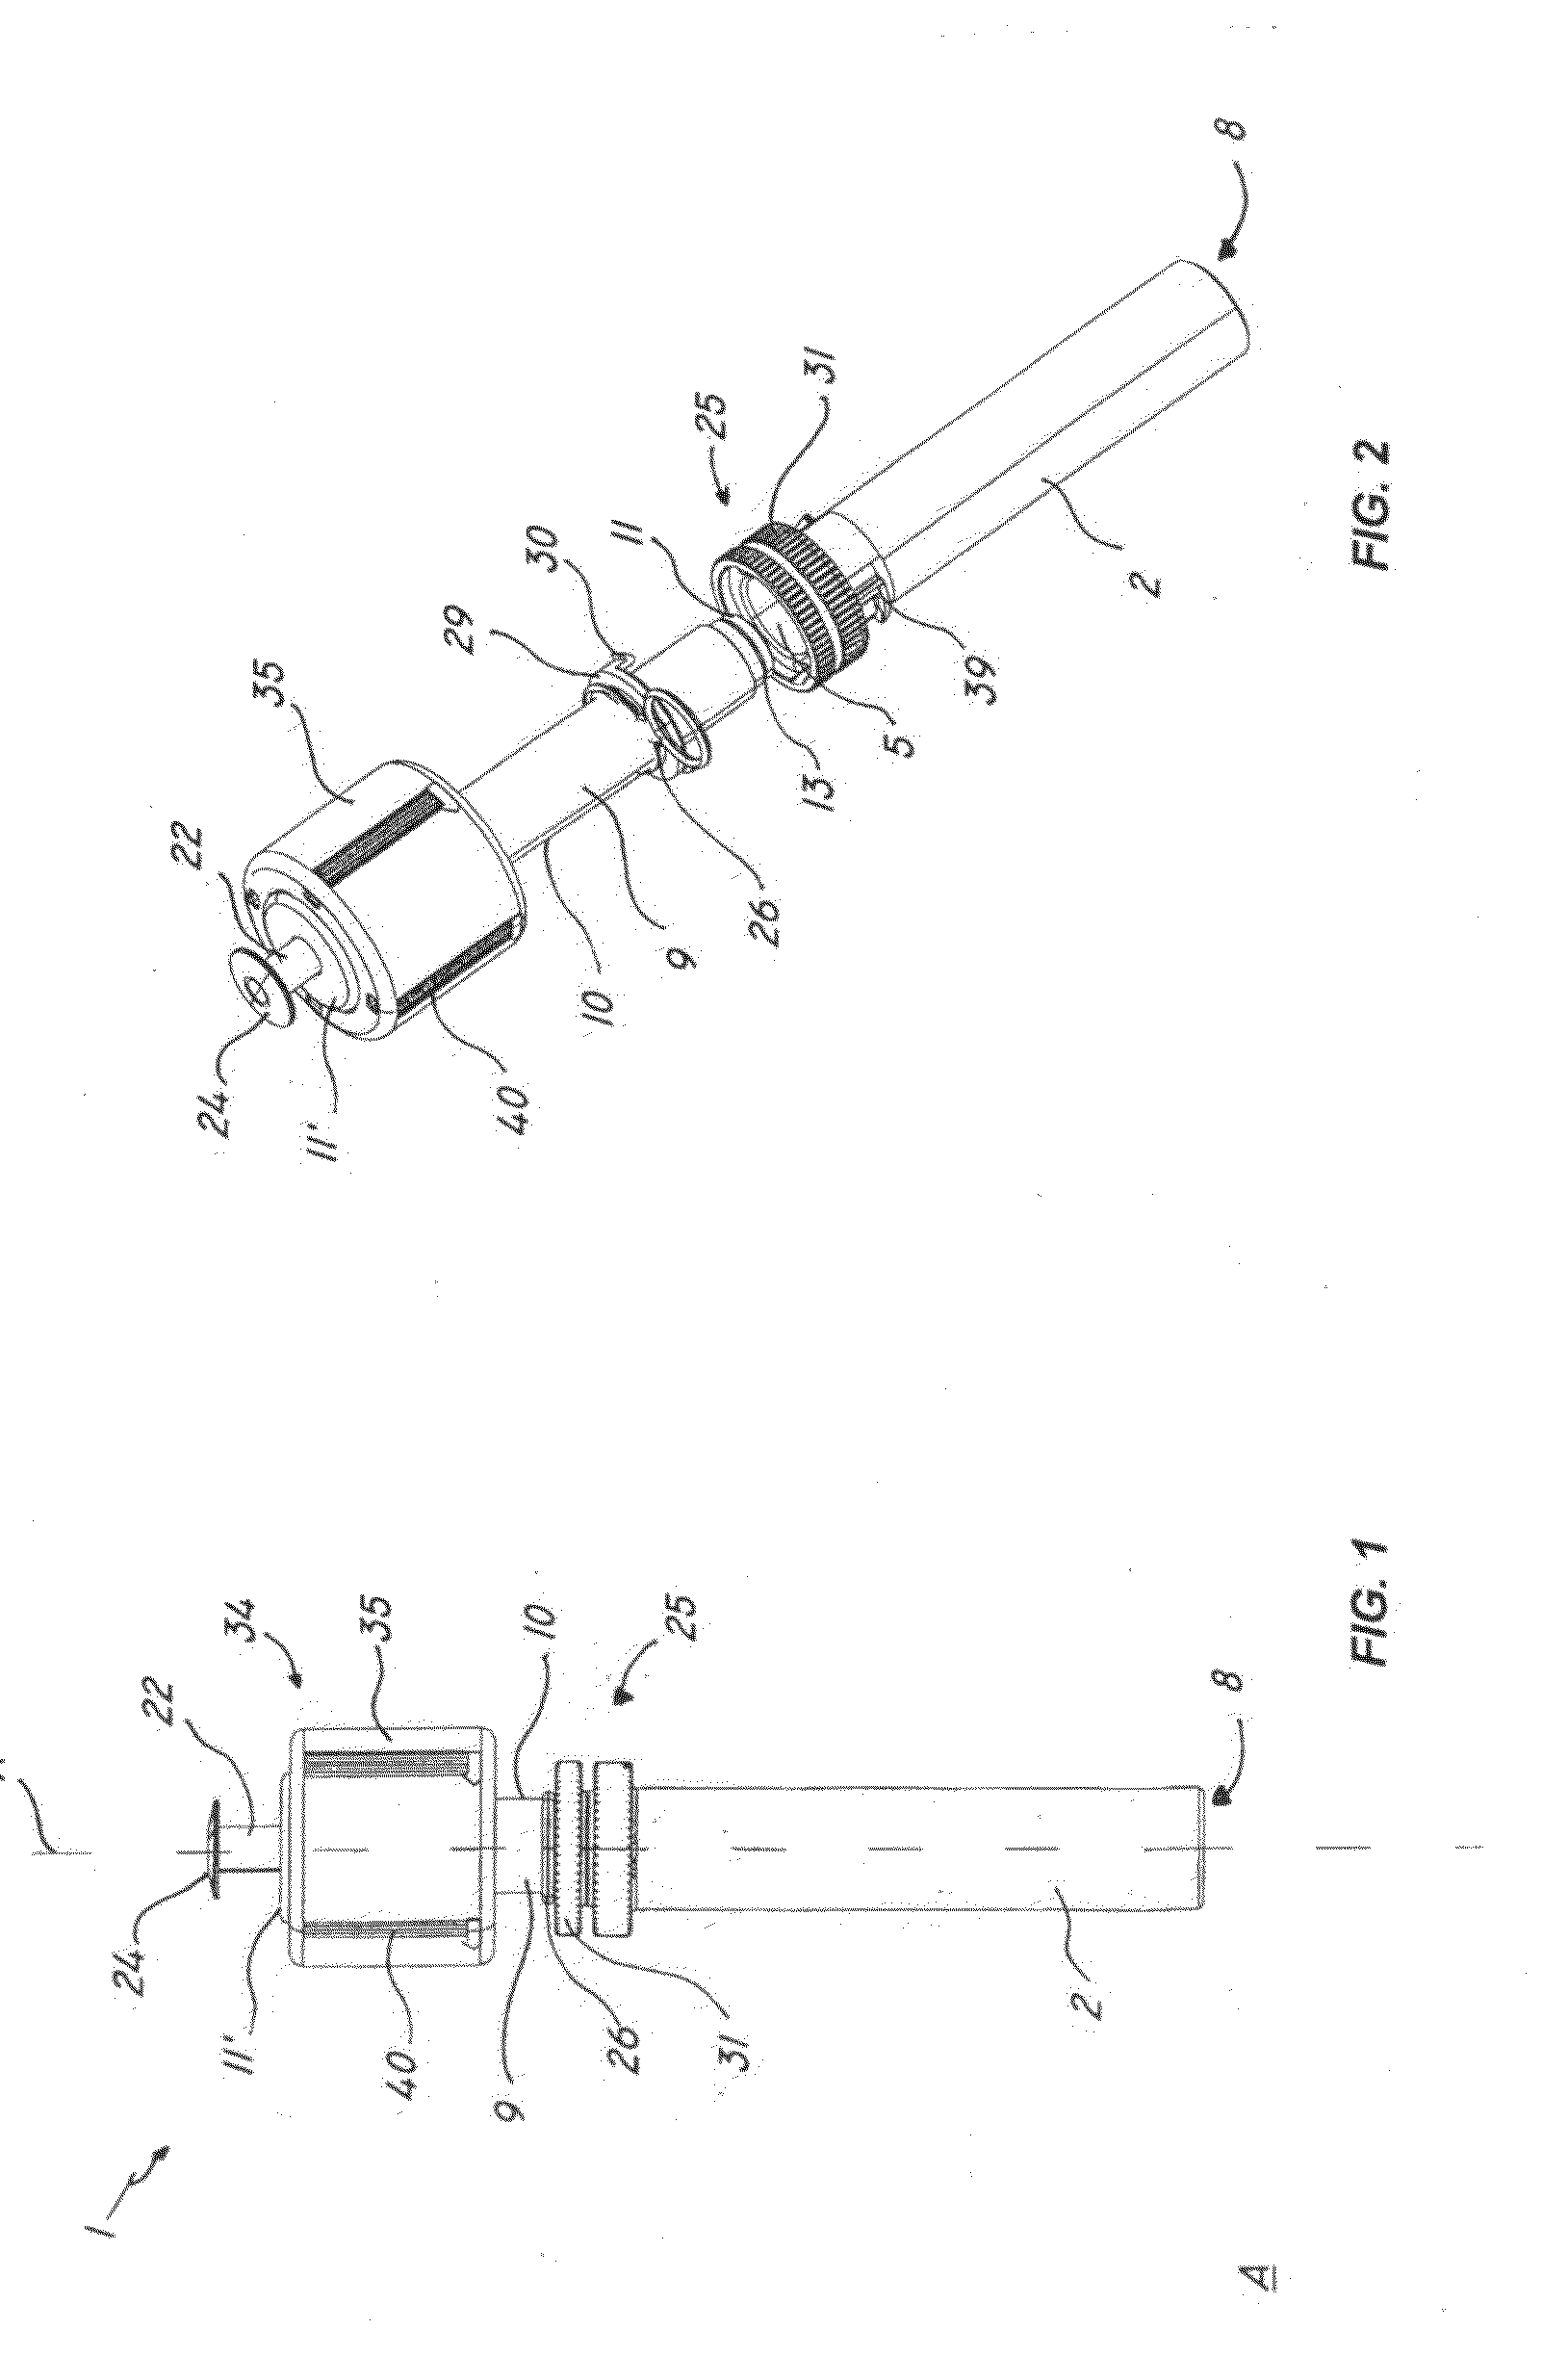 Cartridge For Storage and Delivery of a Two-Phase Compound